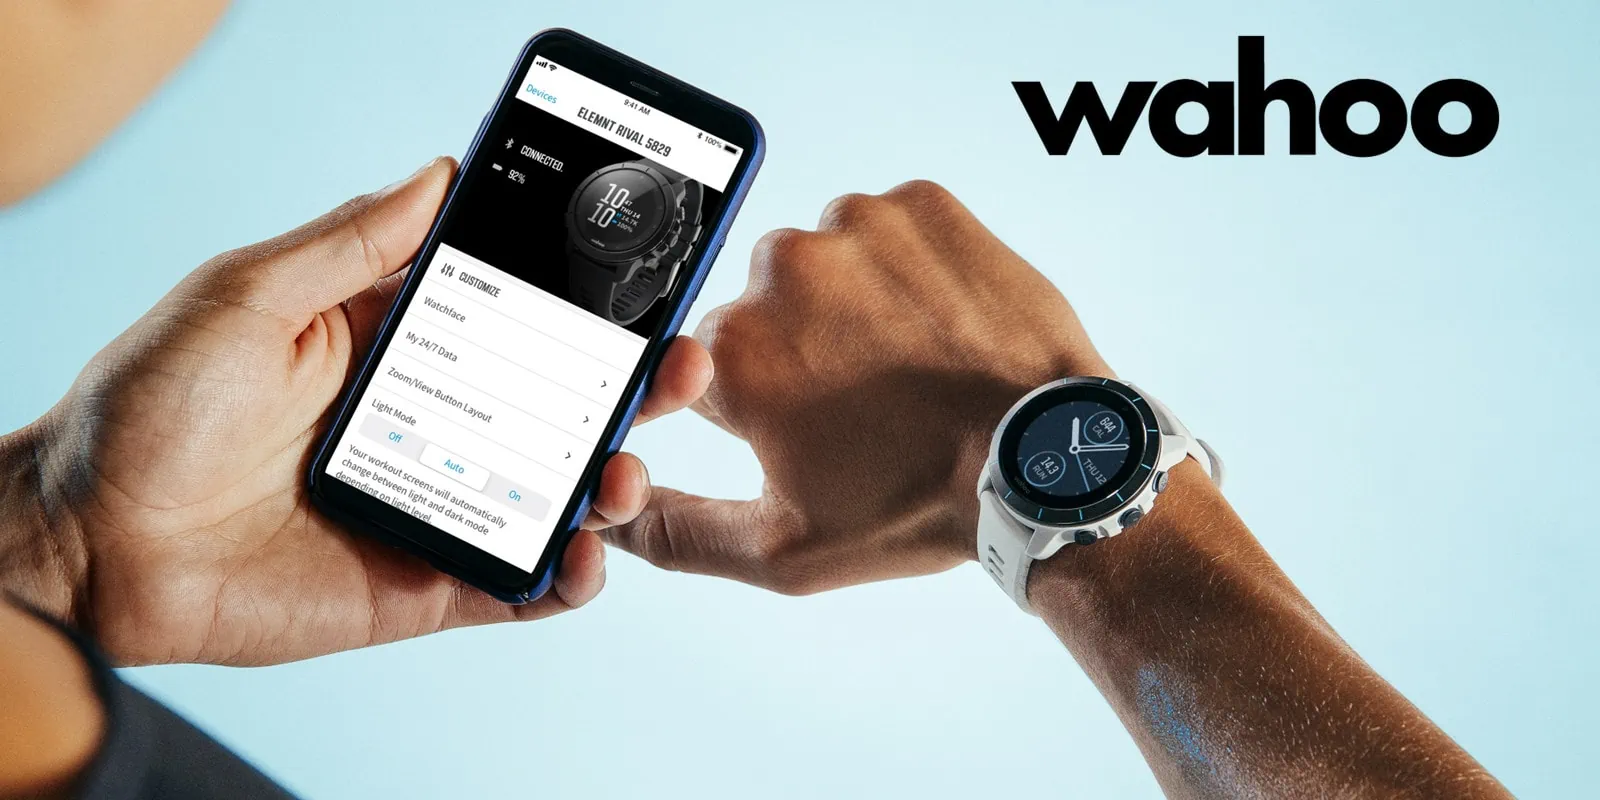 wahoo addidas - Wahoo adds Trailforks and Adidas Running to ELEMNT devices, including ROAM bike computer and RIVAL smartwatch